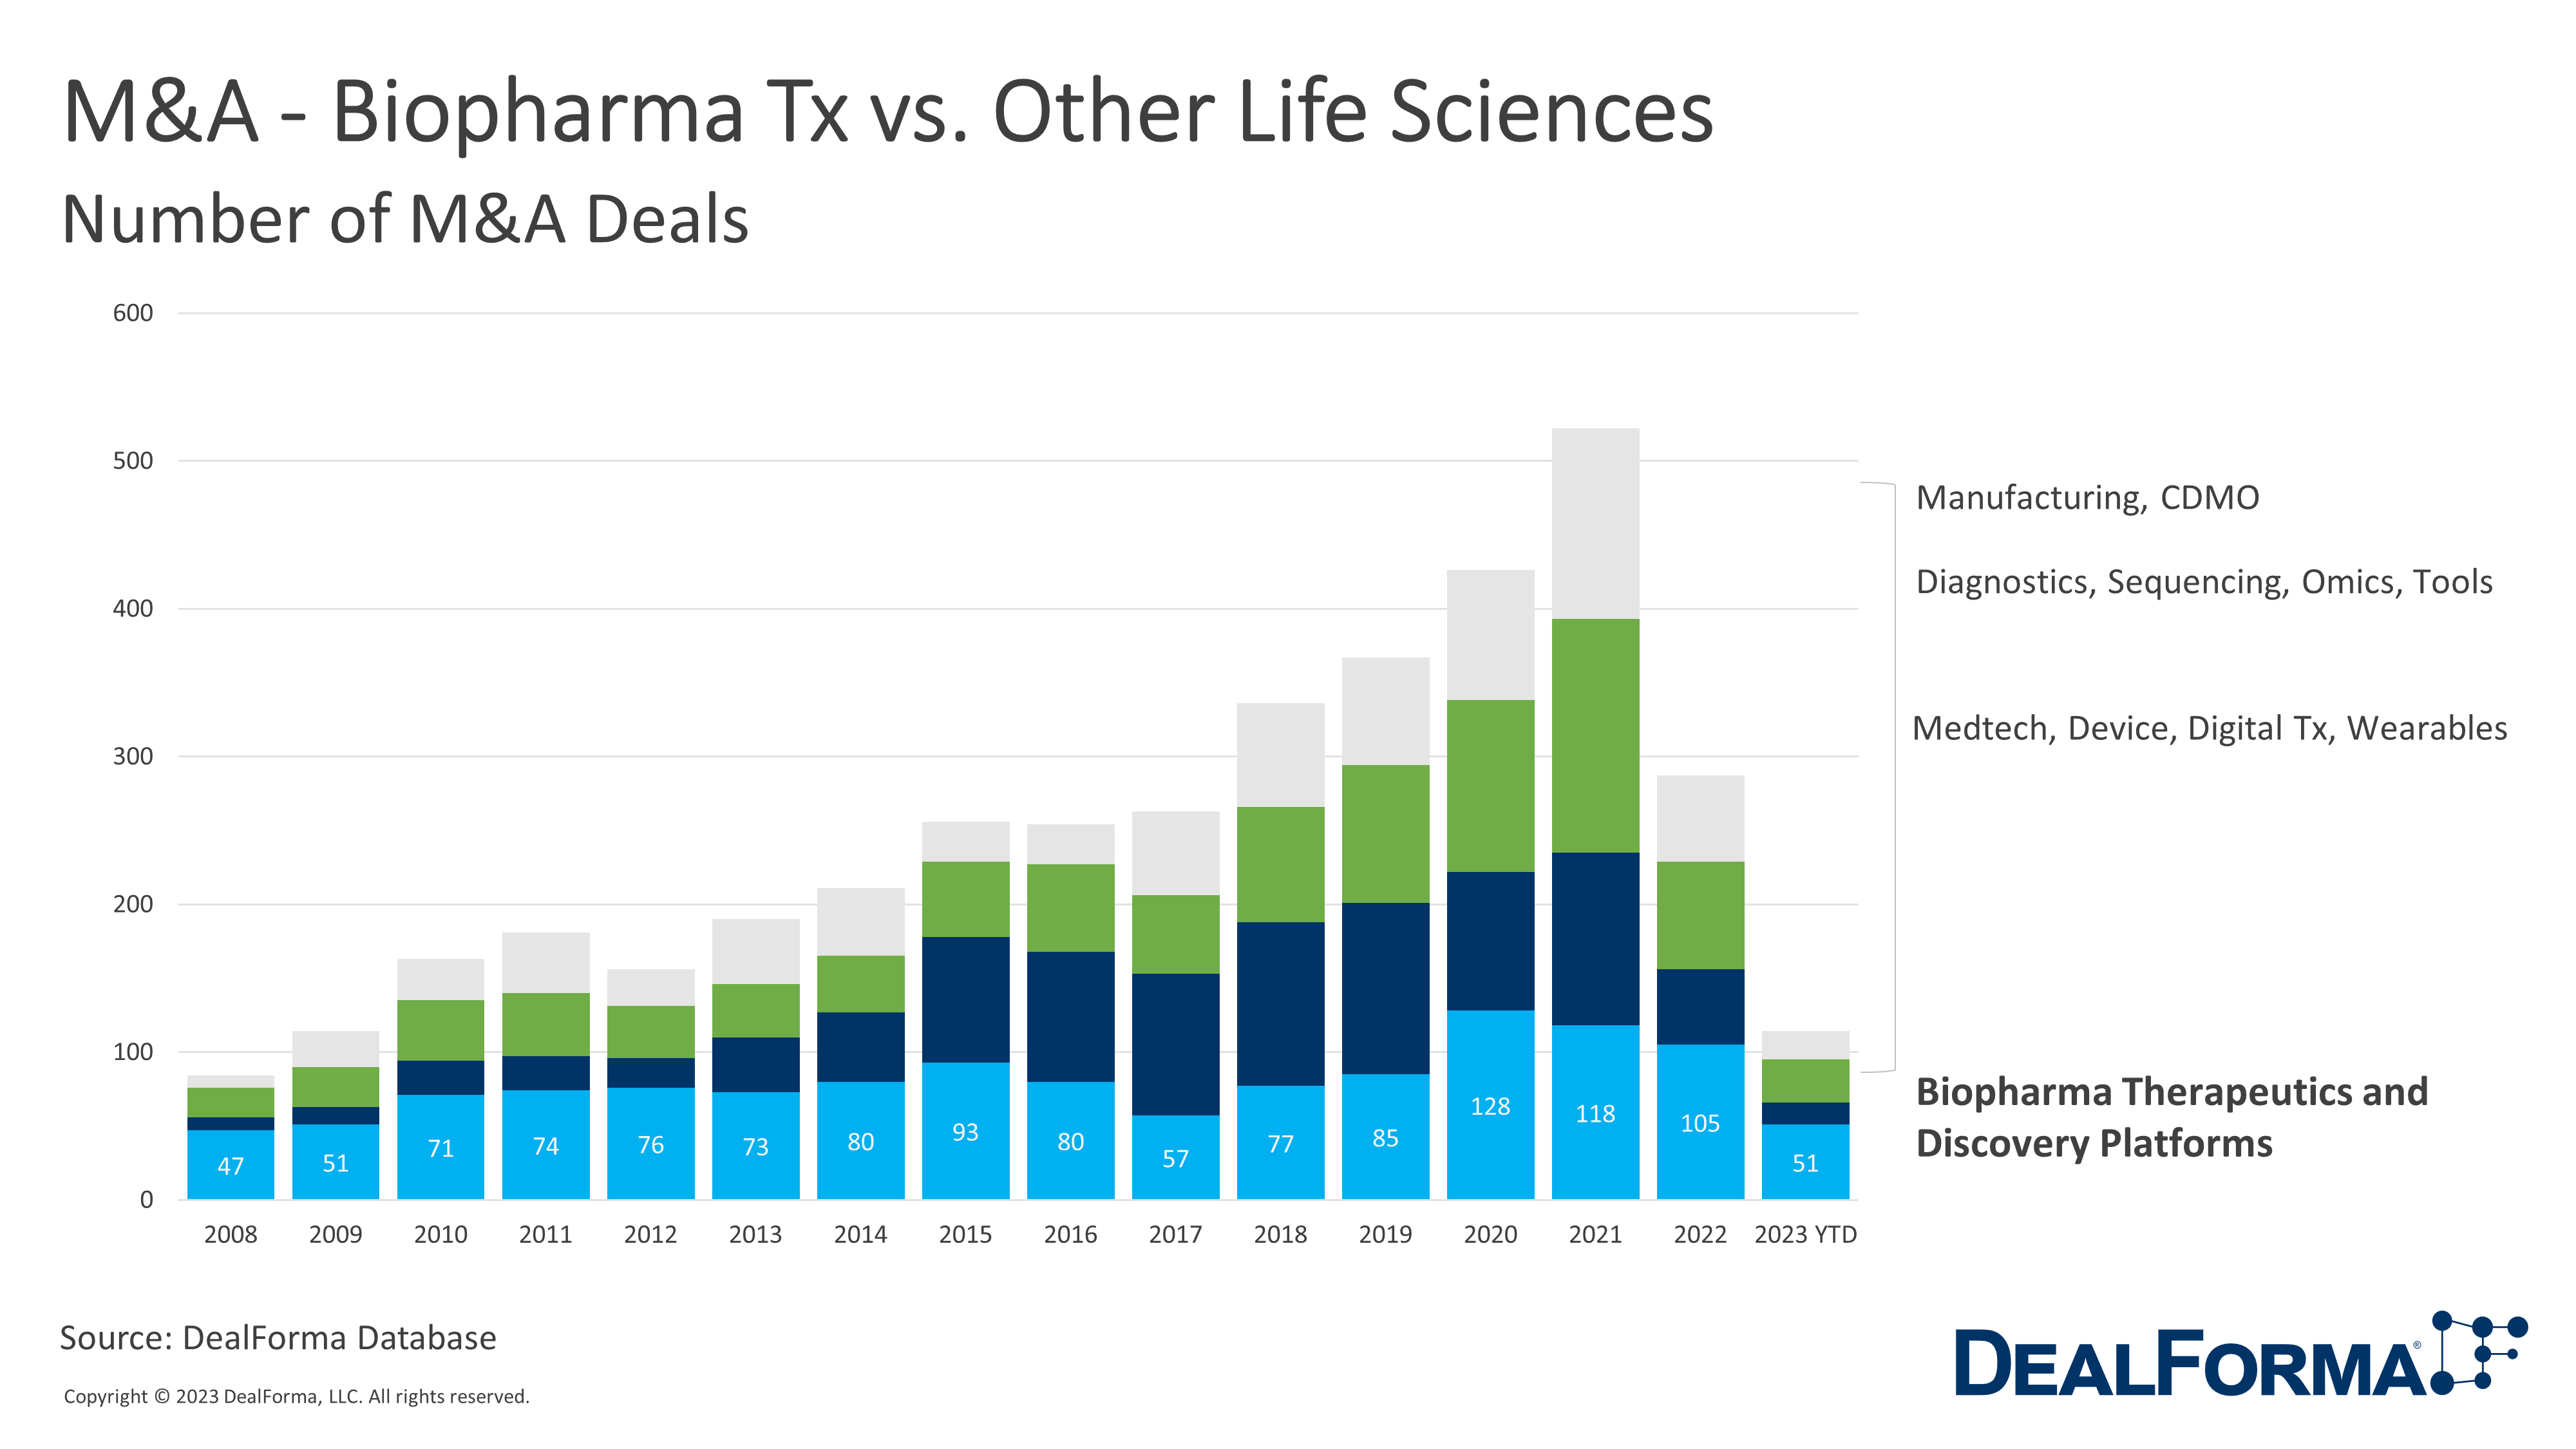 M&A - Biopharma Tx vs. Other Life Sciences. Number of M&A Deals - DealForma